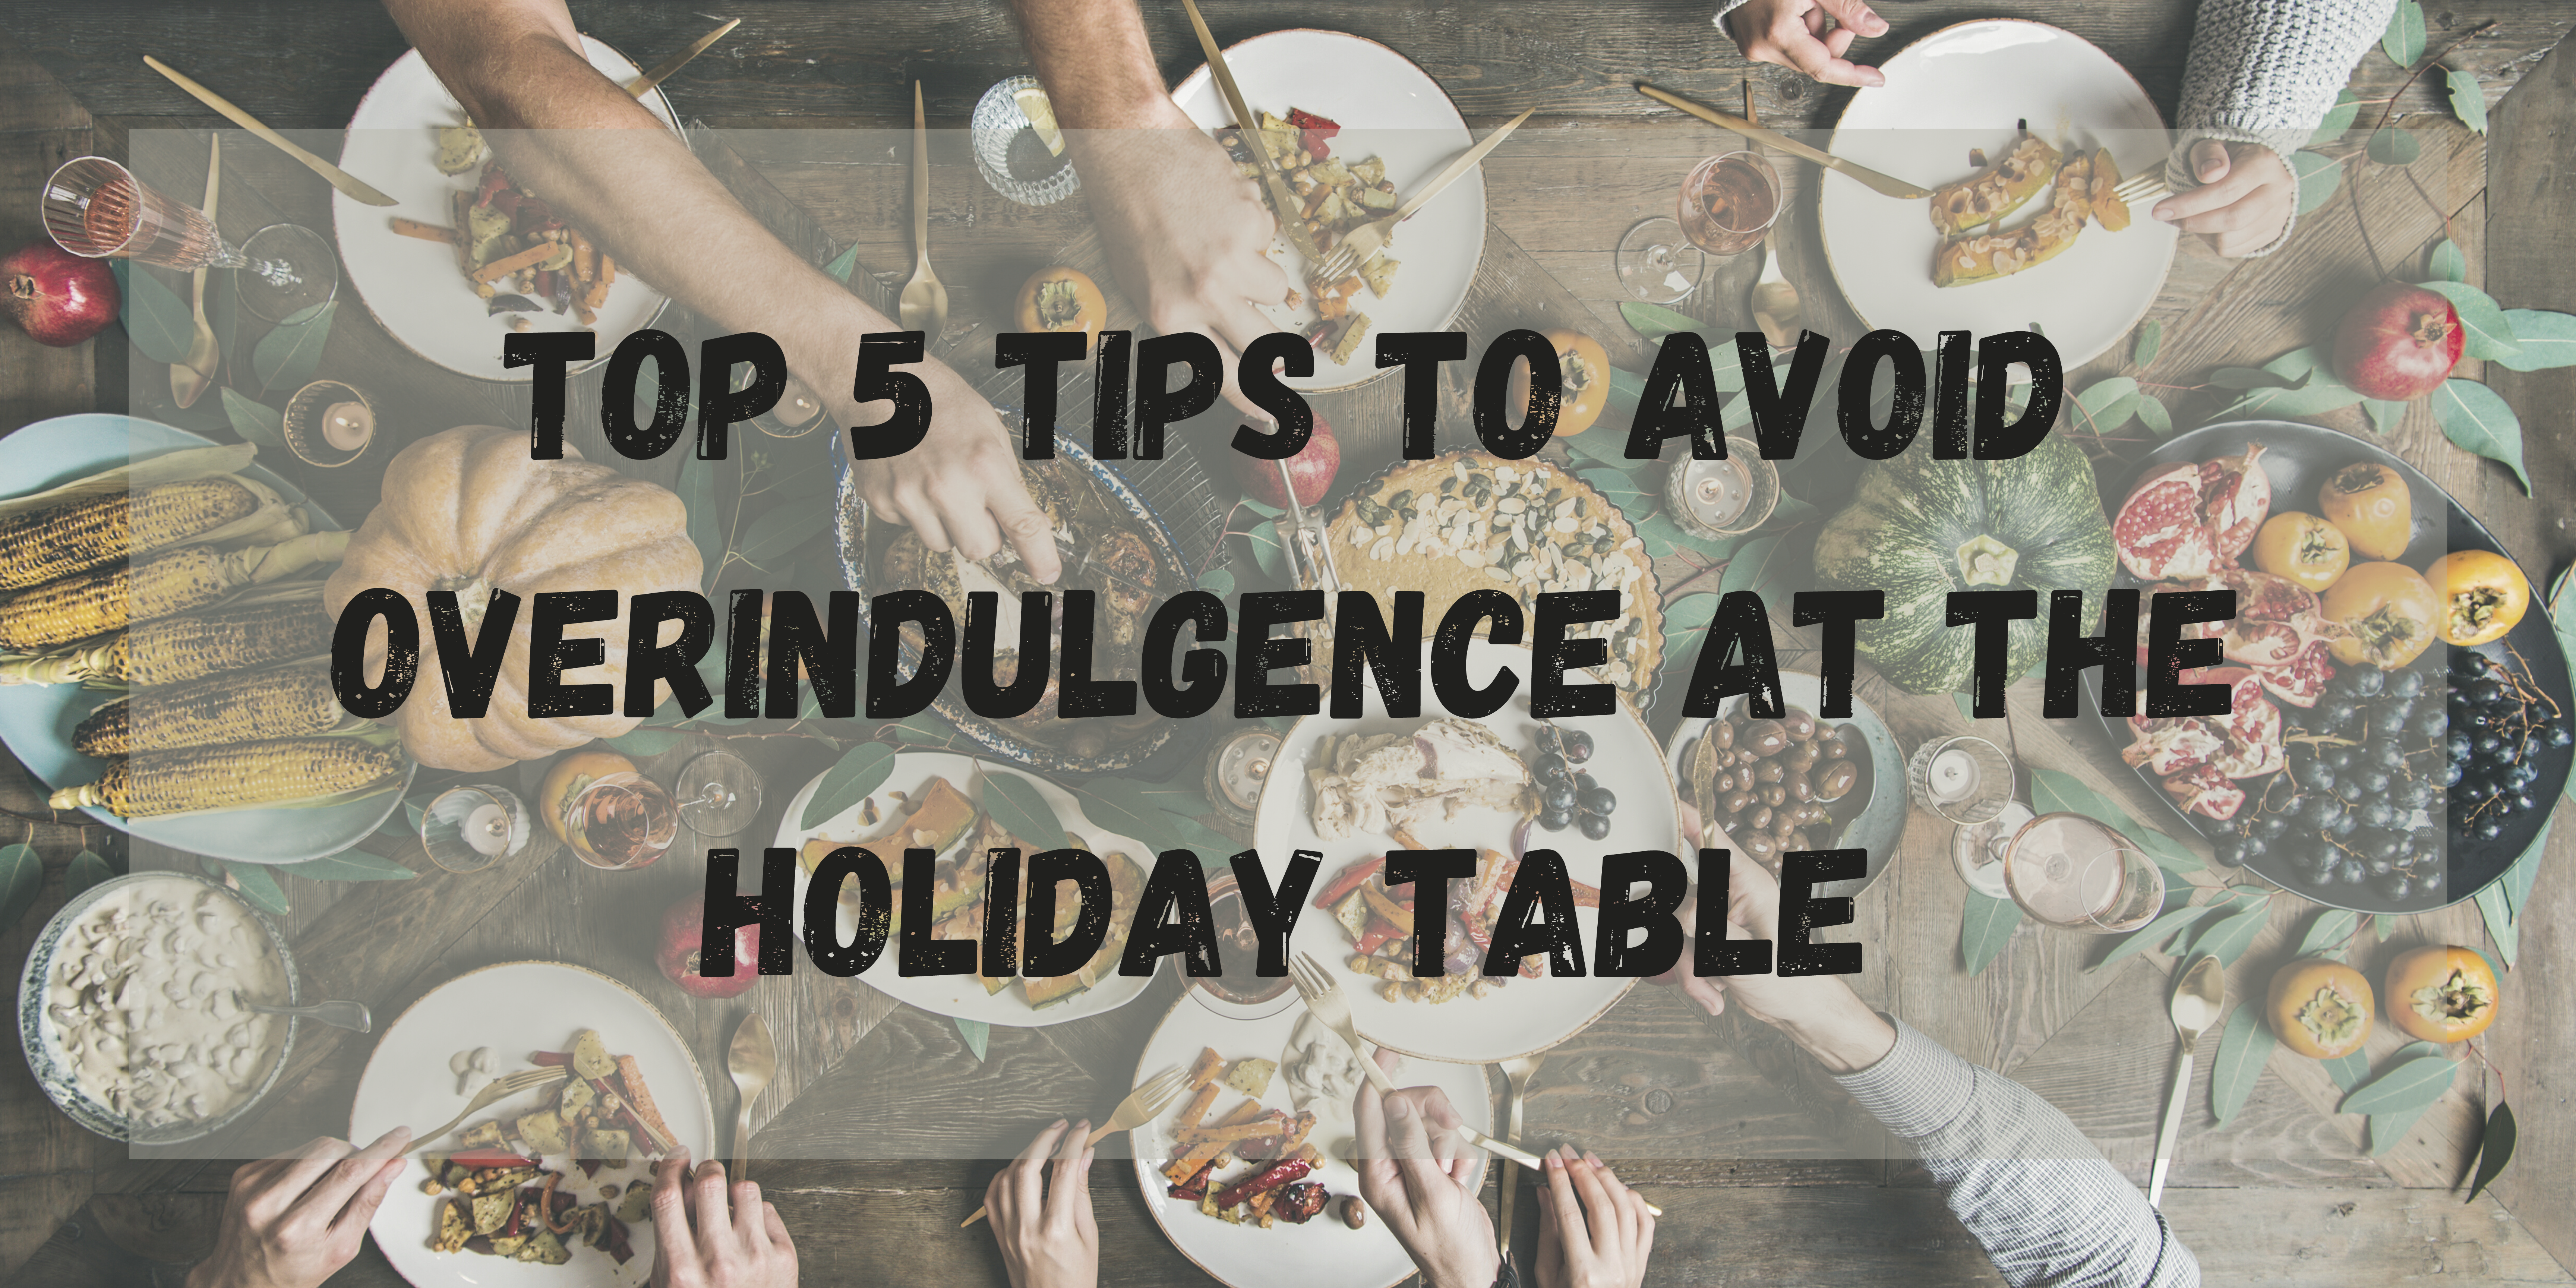 How to Avoid Overindulgence and Holiday Weight Gain